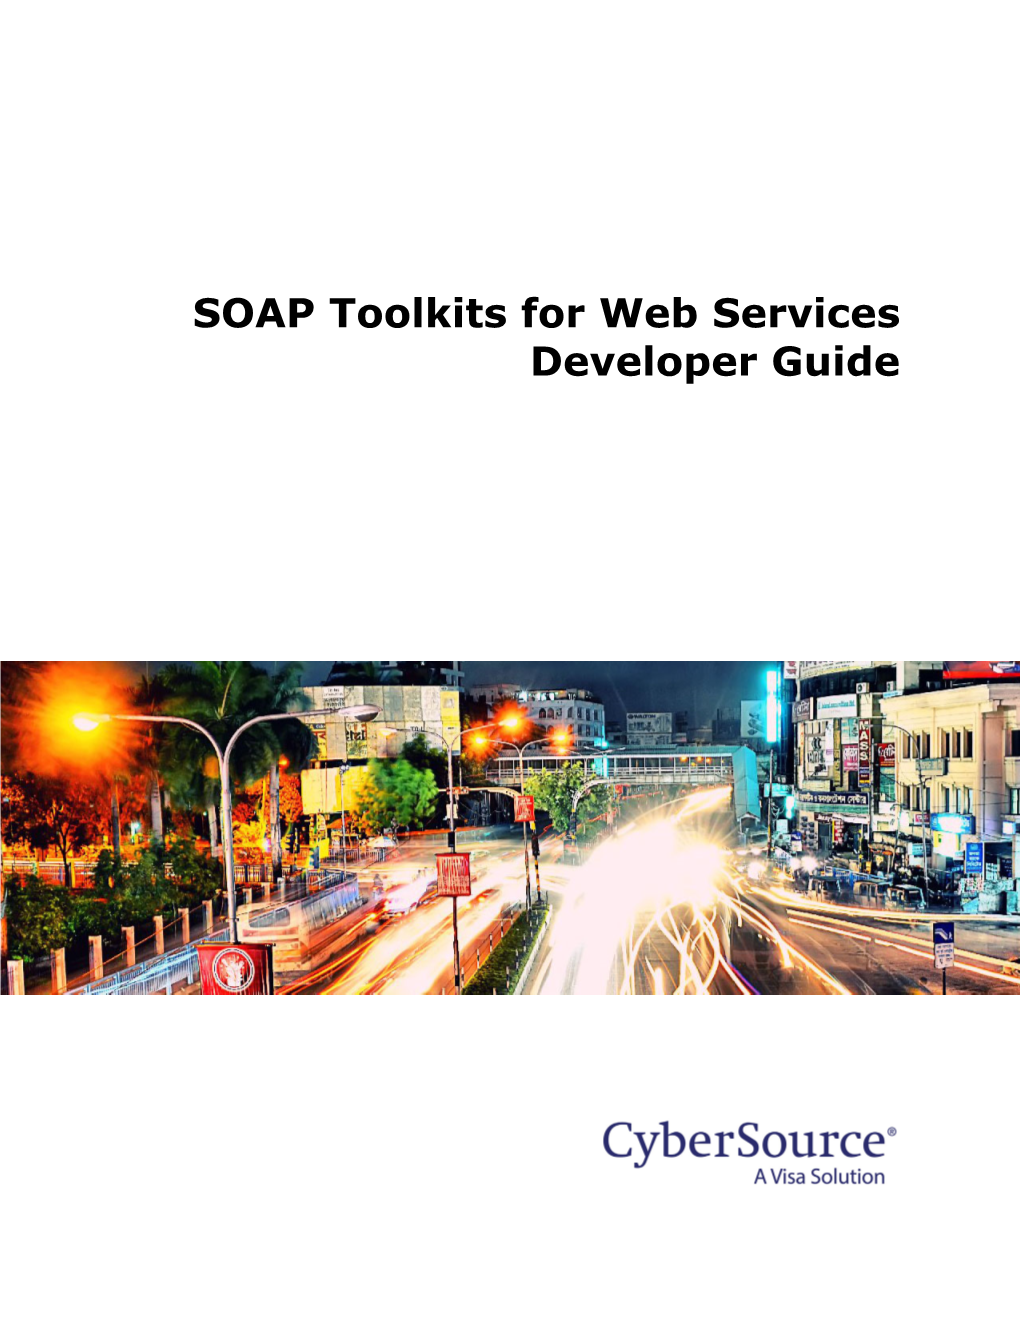 SOAP Toolkits for Web Services Developer Guide